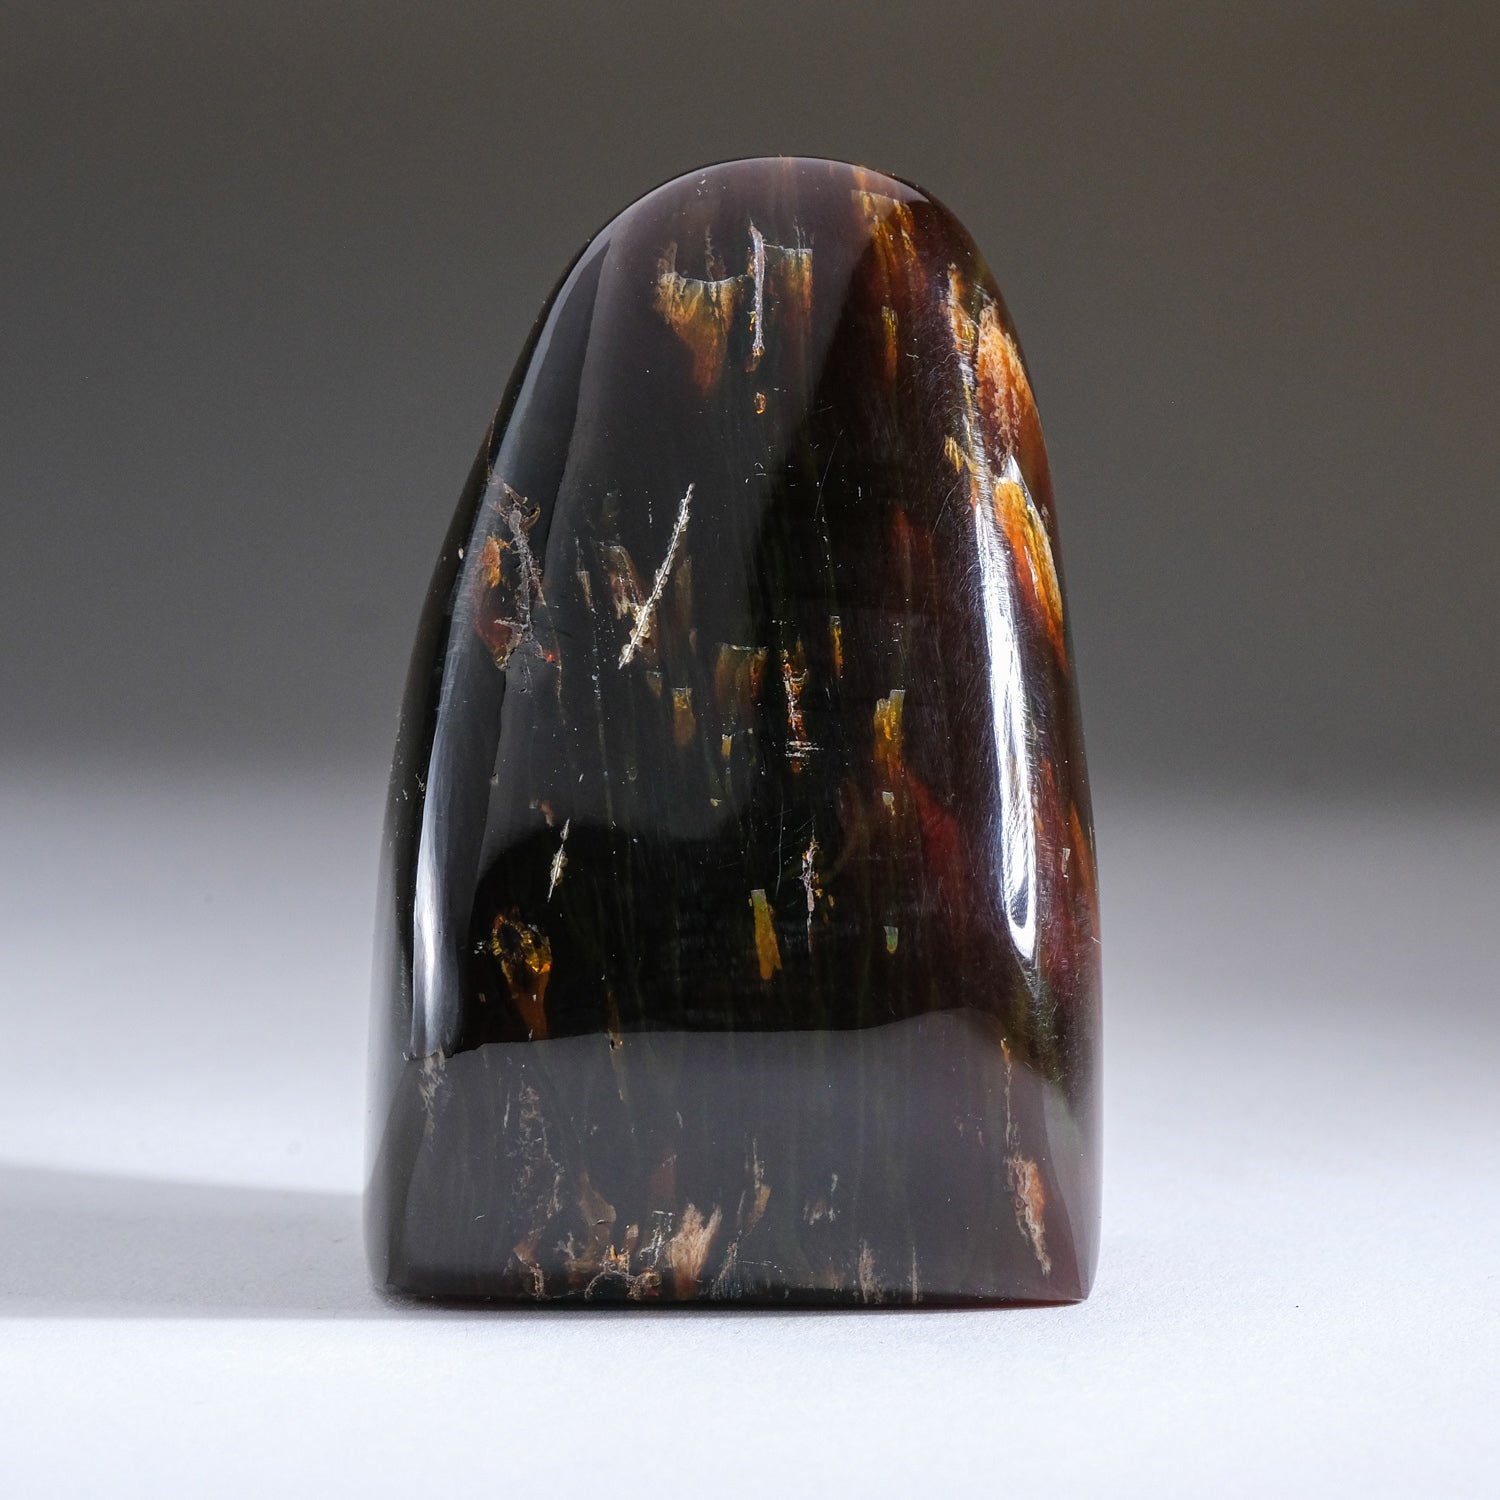 Polished Amber Freeform from Indonesia (151.6 grams)